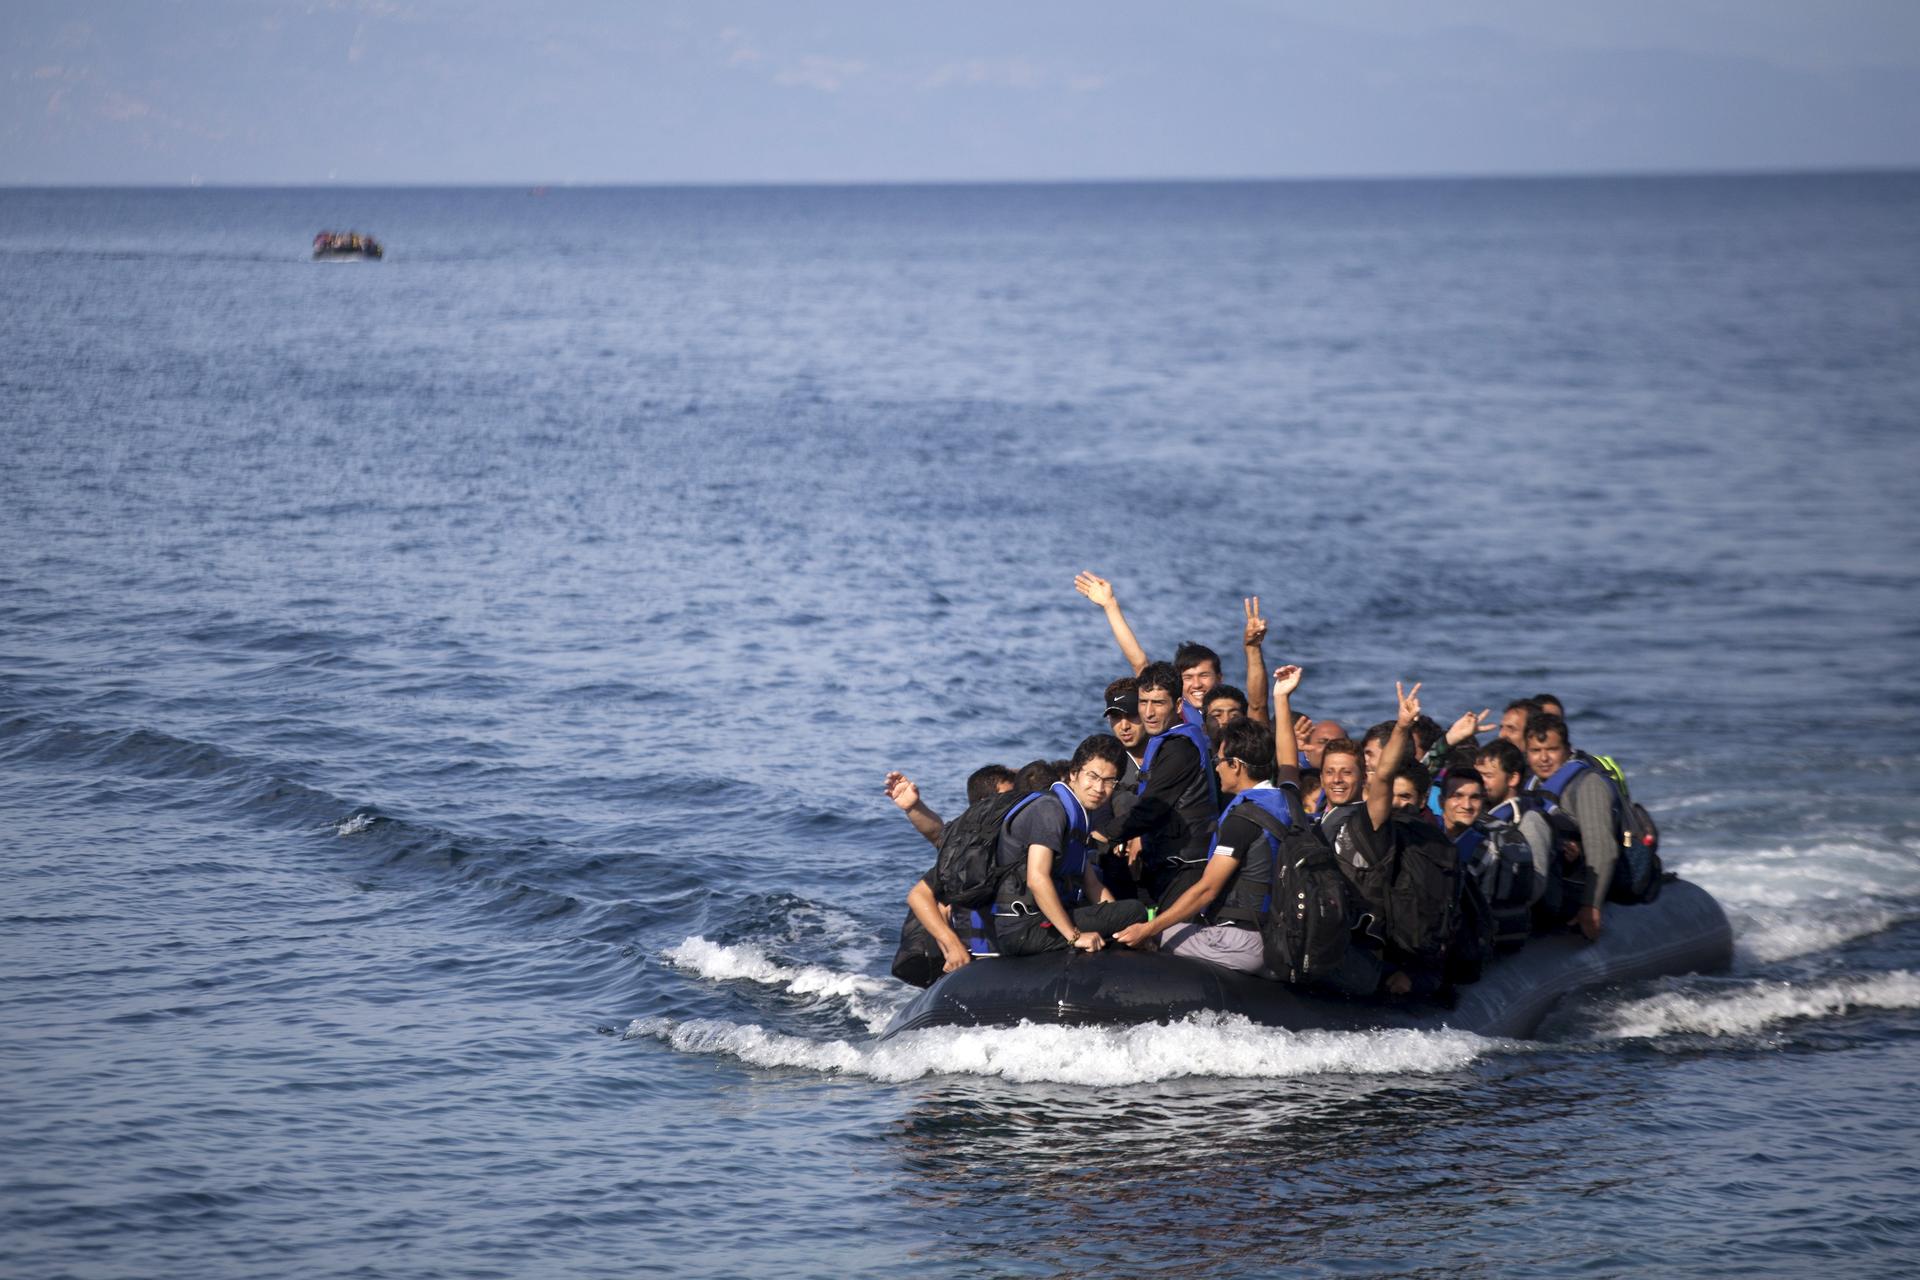 Refugees and migrants on a dinghy wave as they approach the shores of the Greek island of Lesbos.